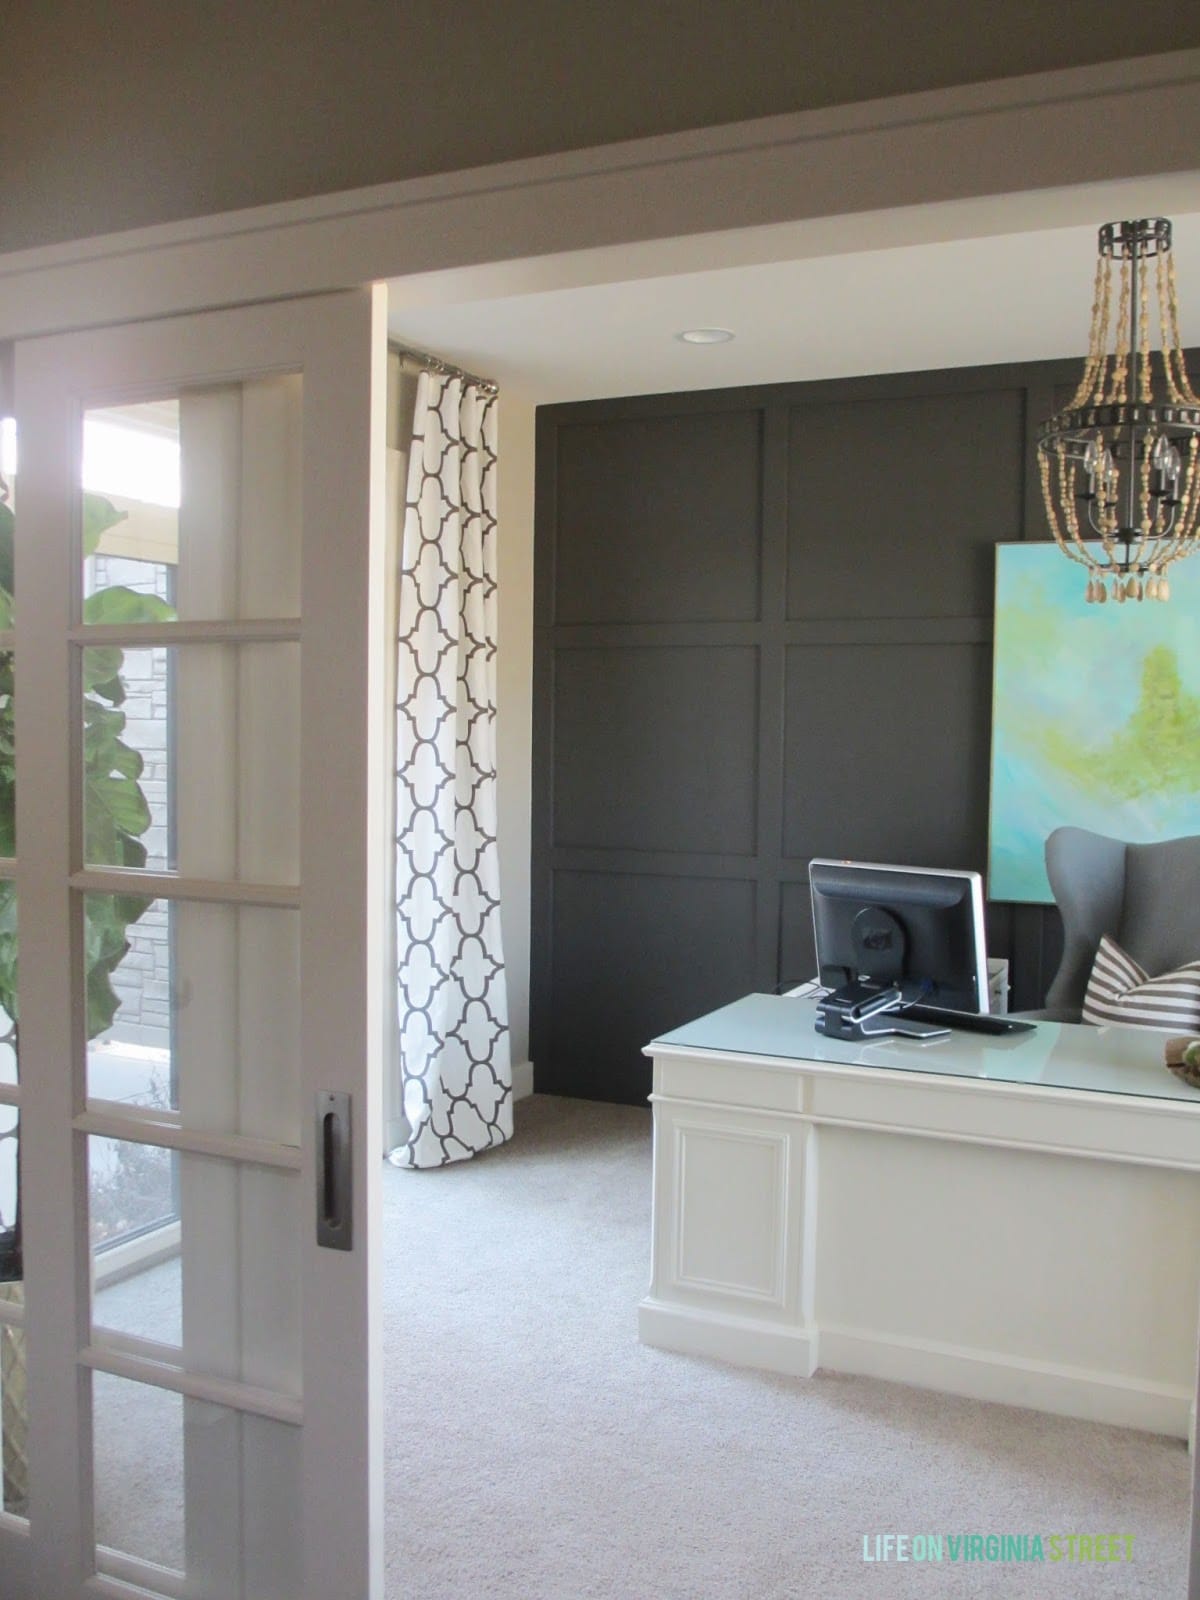 Home office makeover with french pocket sliding doors and Windsor Smith Riad in Clove drapes.